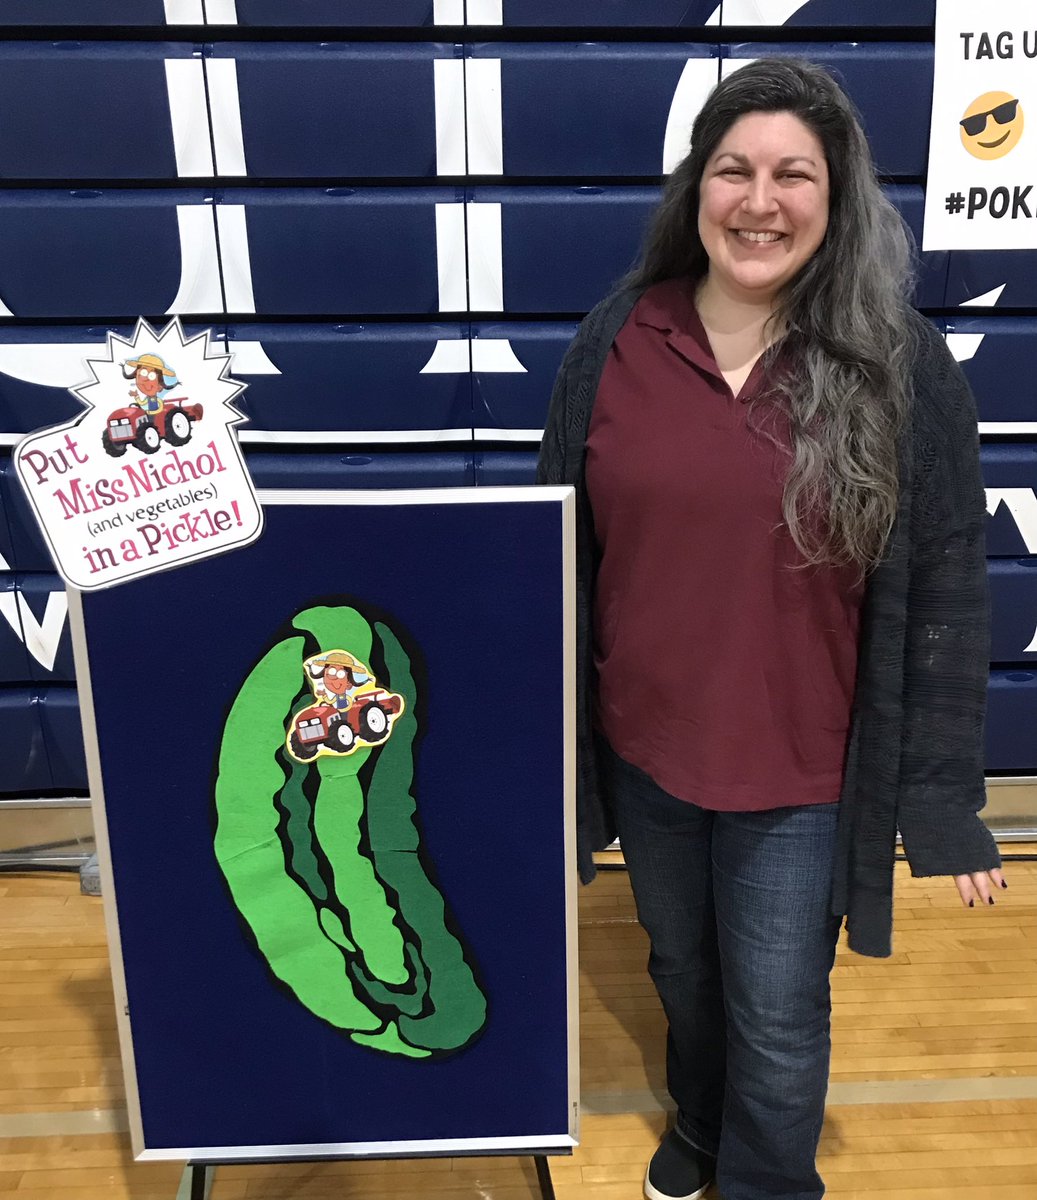 Librarians are so creative. Liz Asta of the Poughkeepsie Public Library made this “Put Miss Nichol In a Pickle” game for the kids at the Poughkeepsie Book Festival last Saturday.